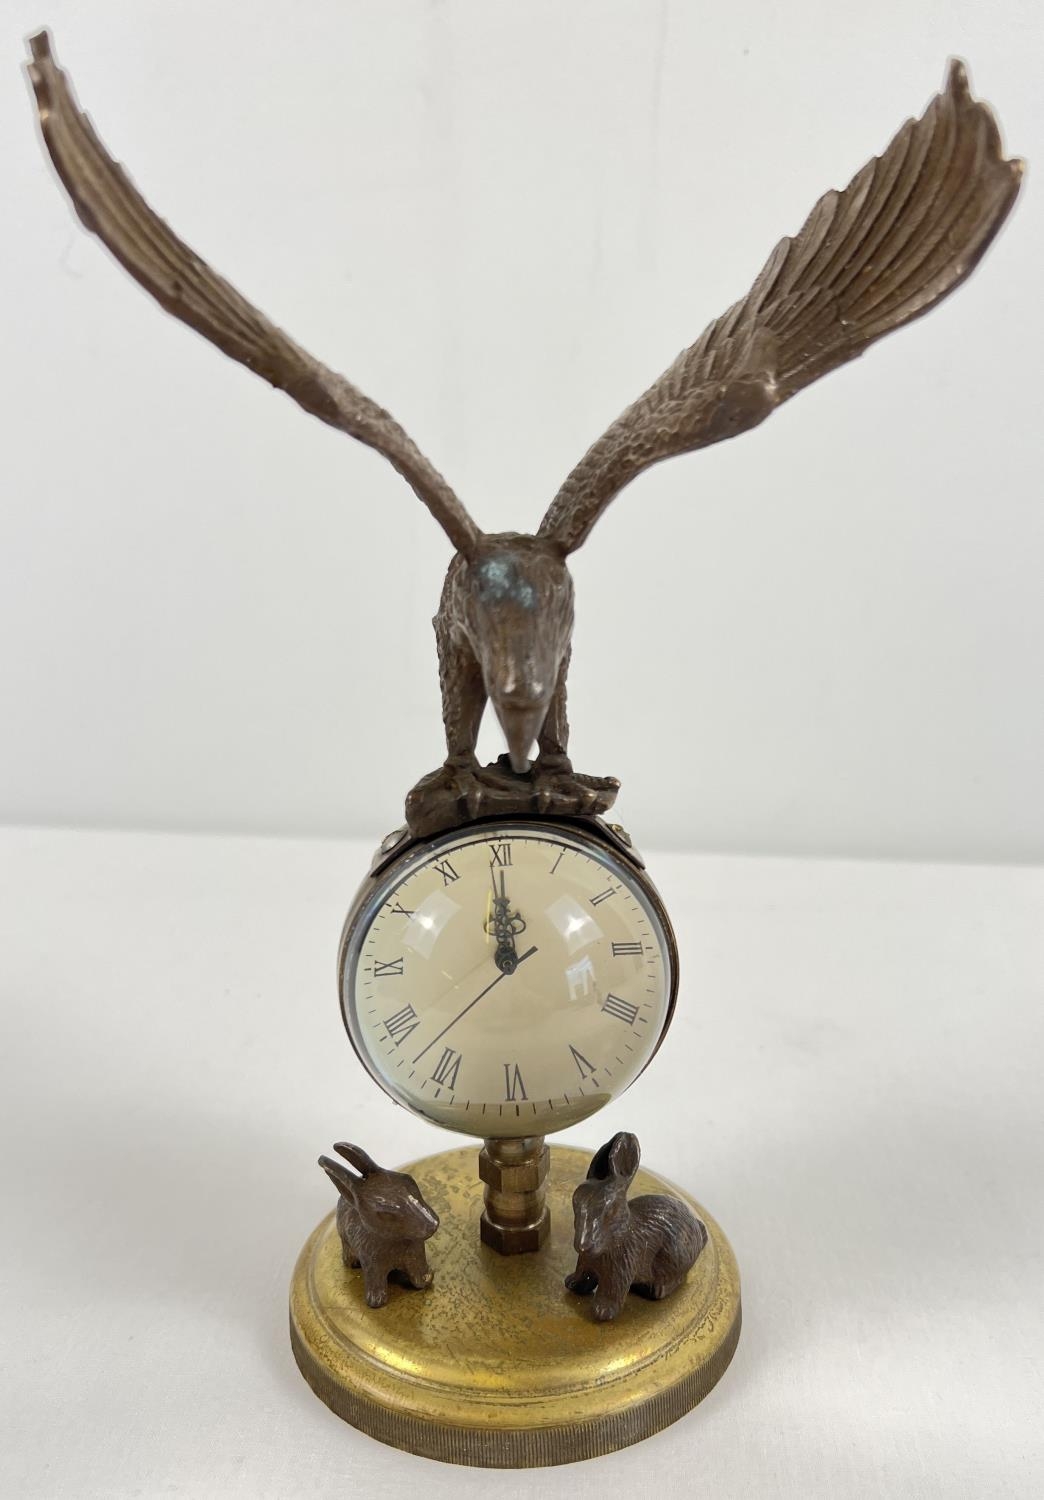 An ornamental brass ball clock with eagle shaped finial and rabbit figures to base. With wind up